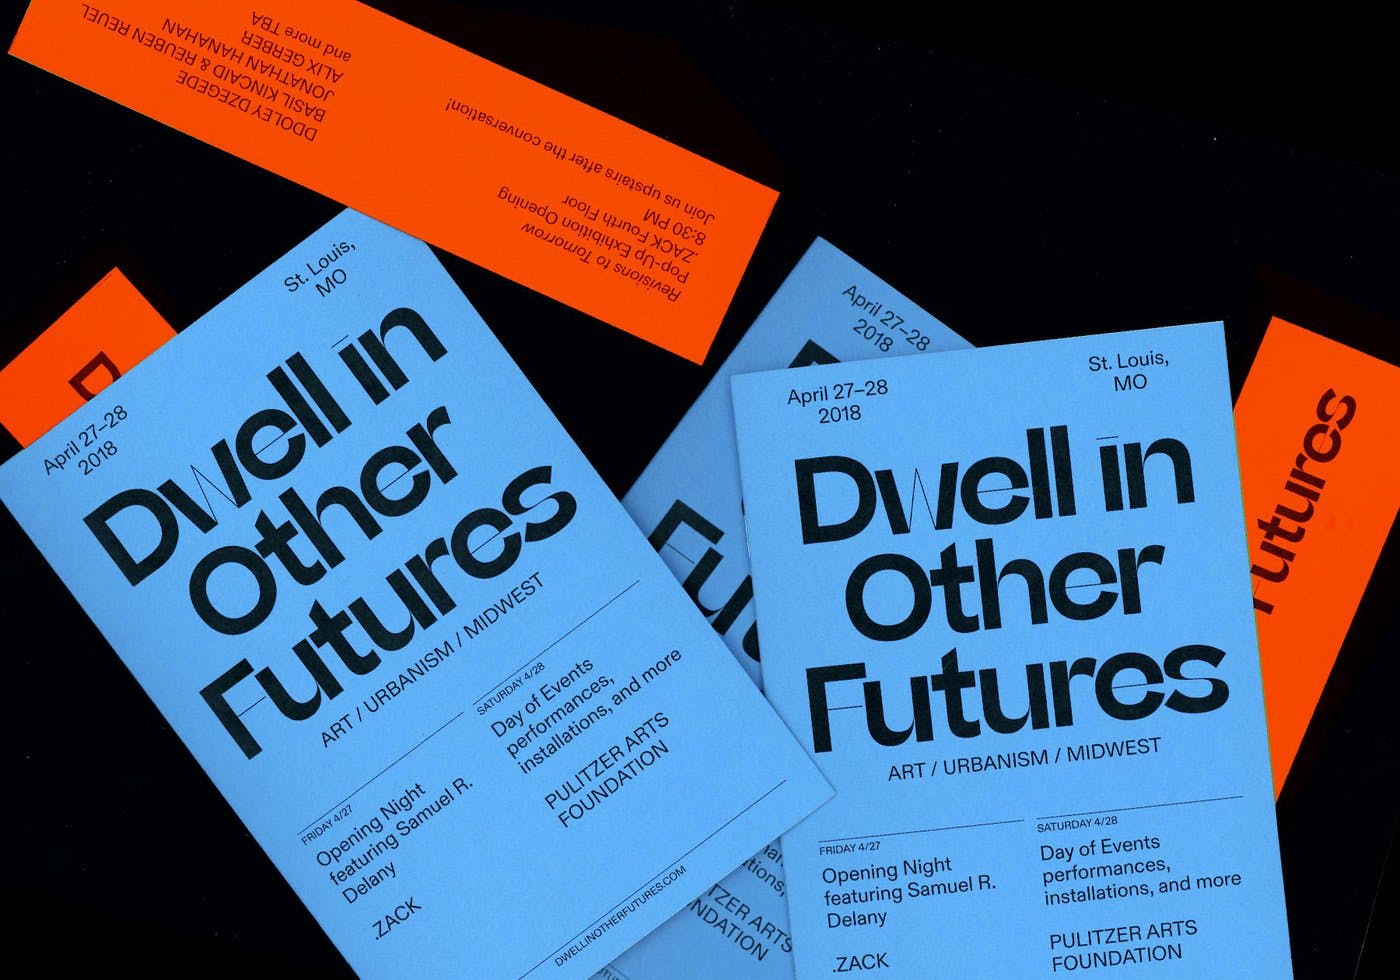 Dwell in Other Futures conference branding, design by Noah Baker